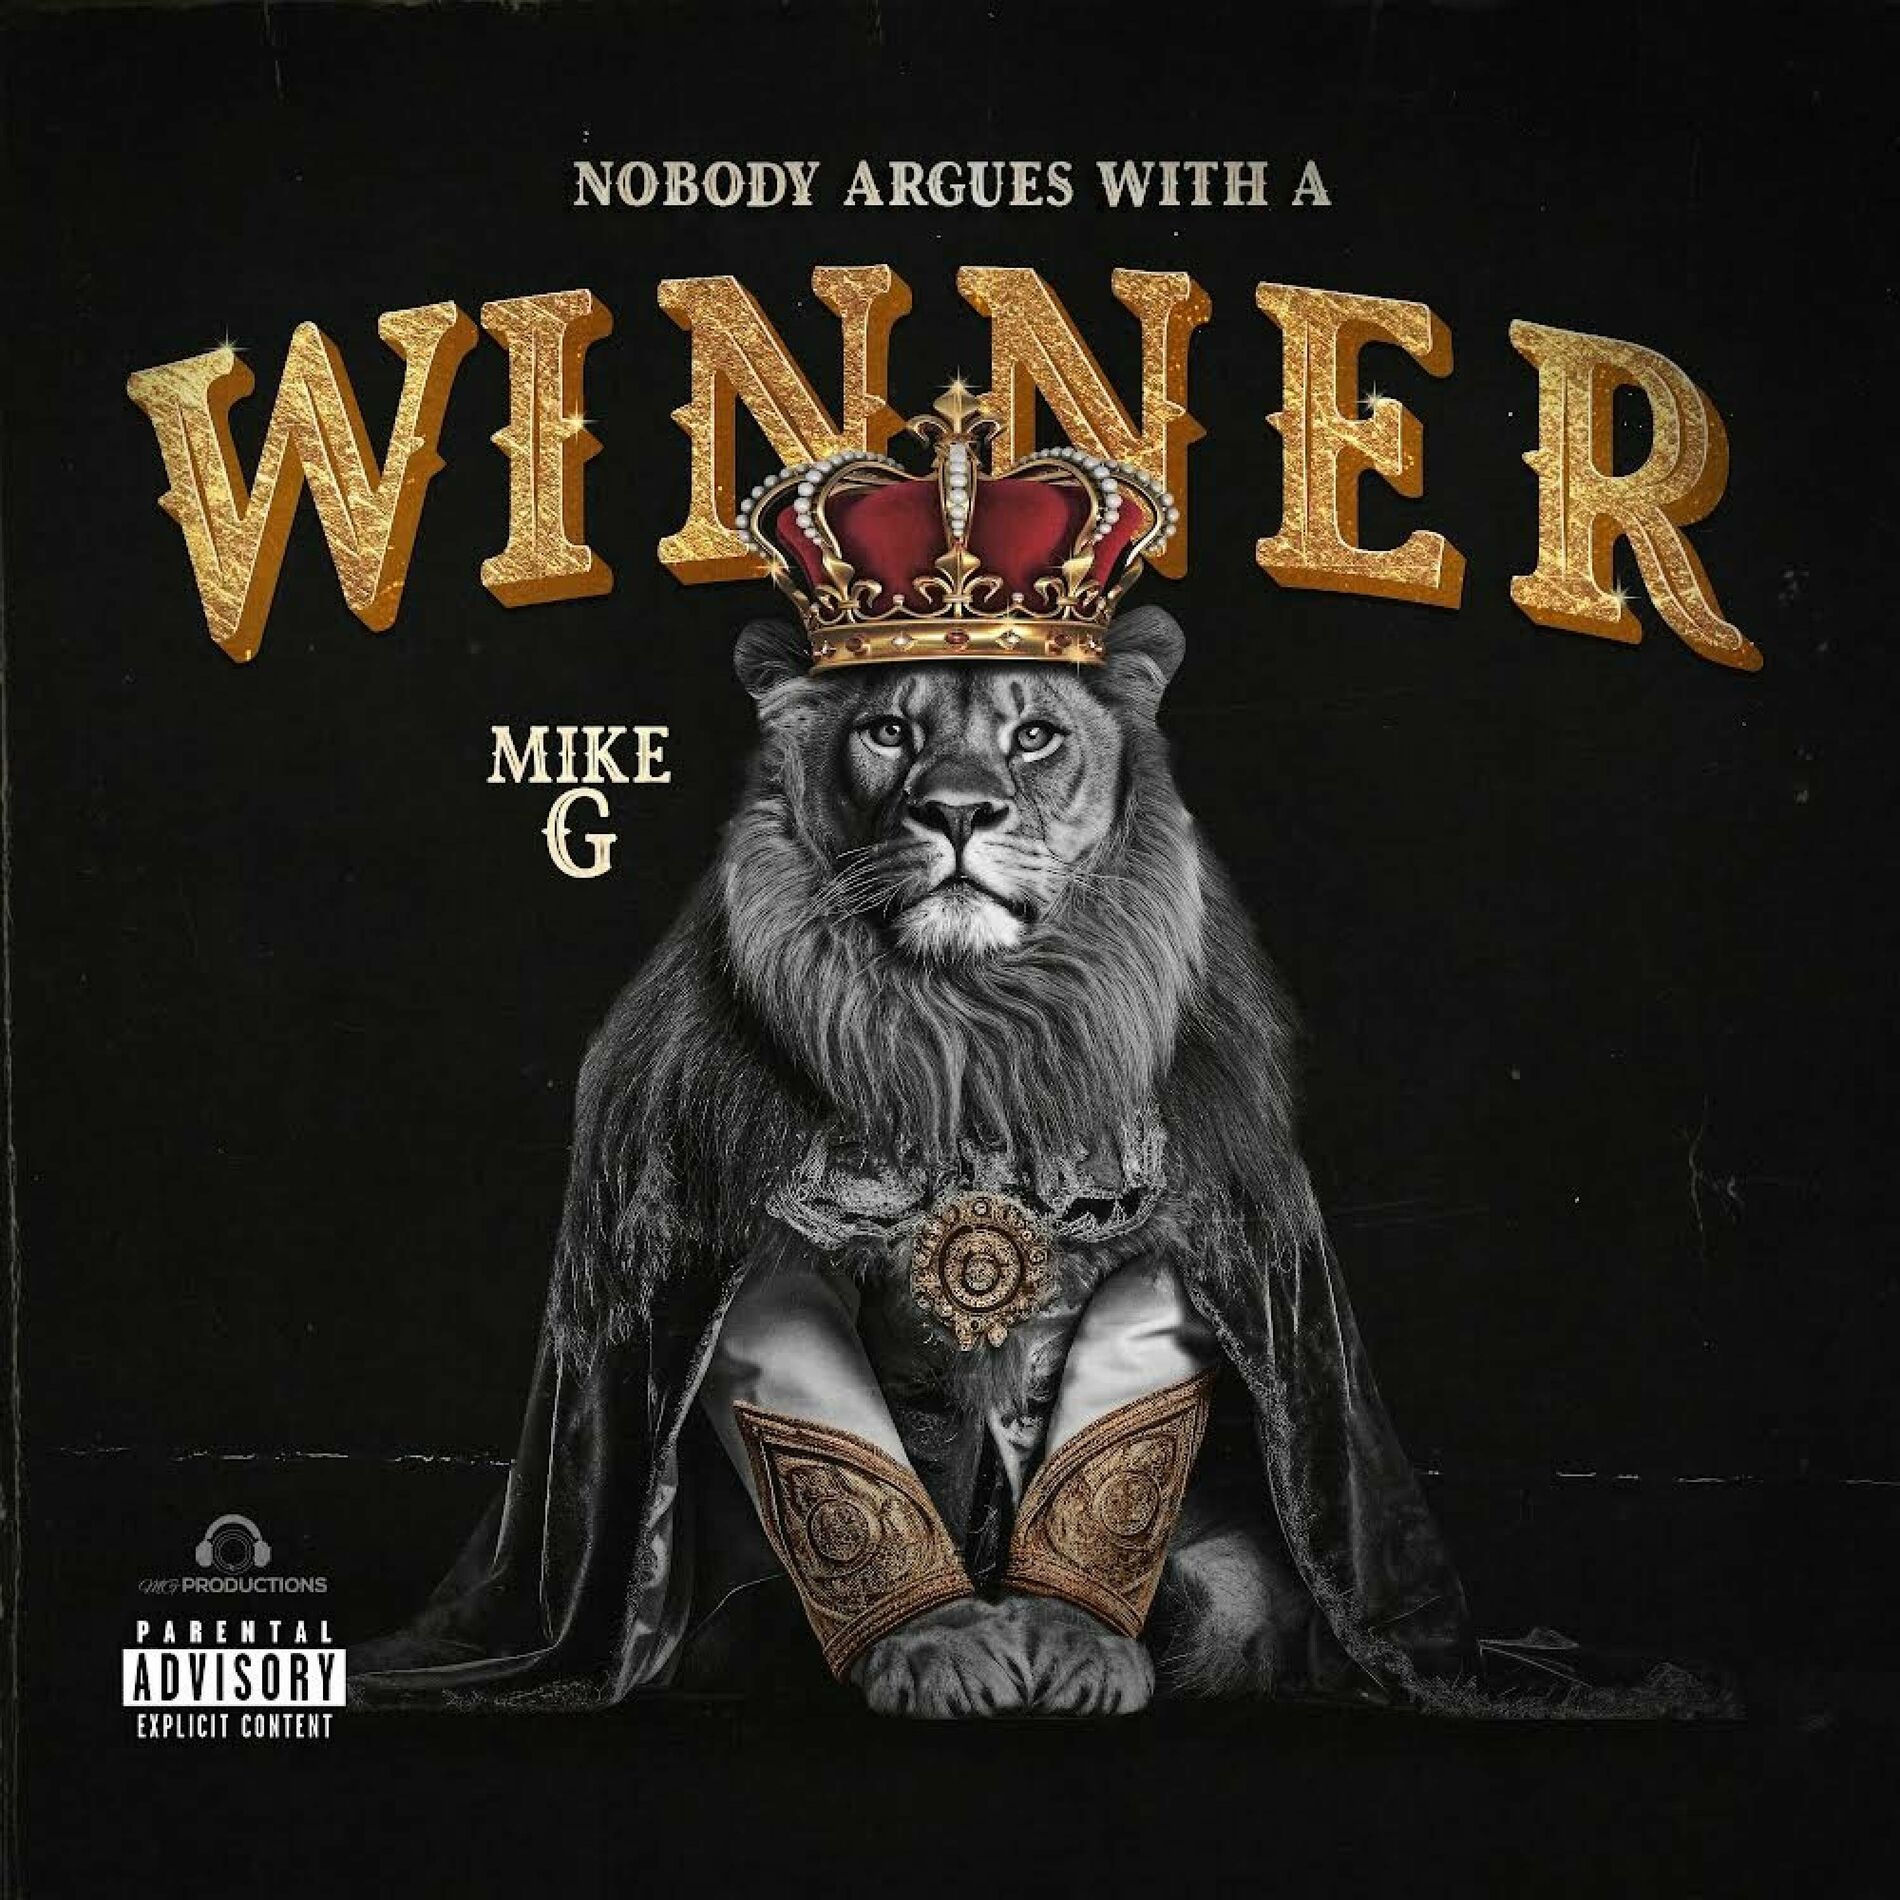 Mike G: albums, songs, playlists | Listen on Deezer